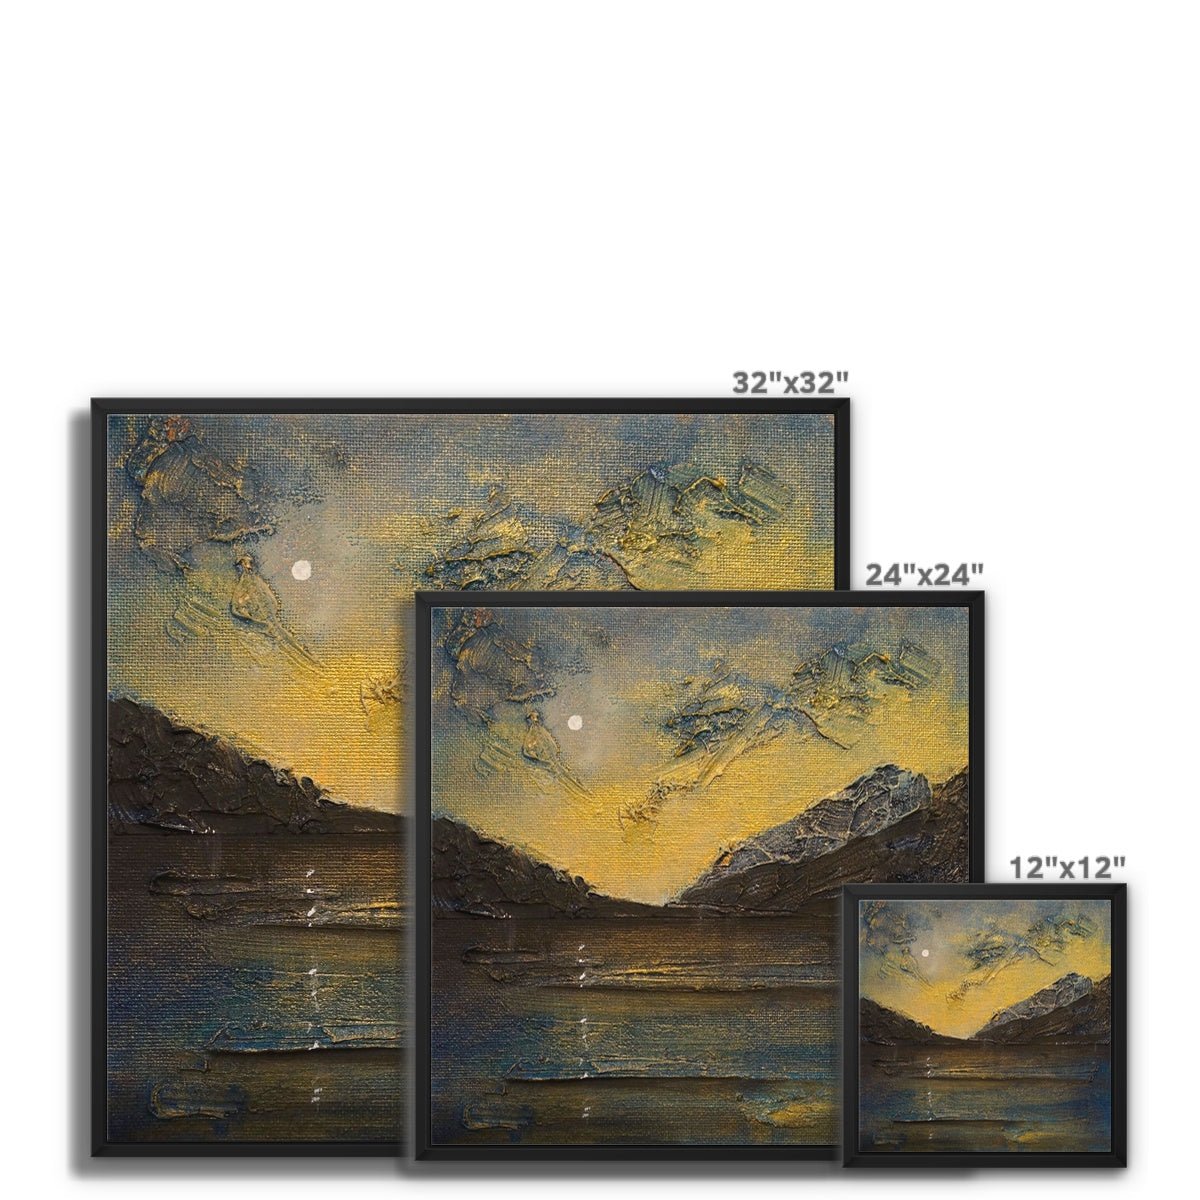 Loch Lomond Moonlight Painting | Framed Canvas From Scotland-Floating Framed Canvas Prints-Scottish Lochs & Mountains Art Gallery-Paintings, Prints, Homeware, Art Gifts From Scotland By Scottish Artist Kevin Hunter